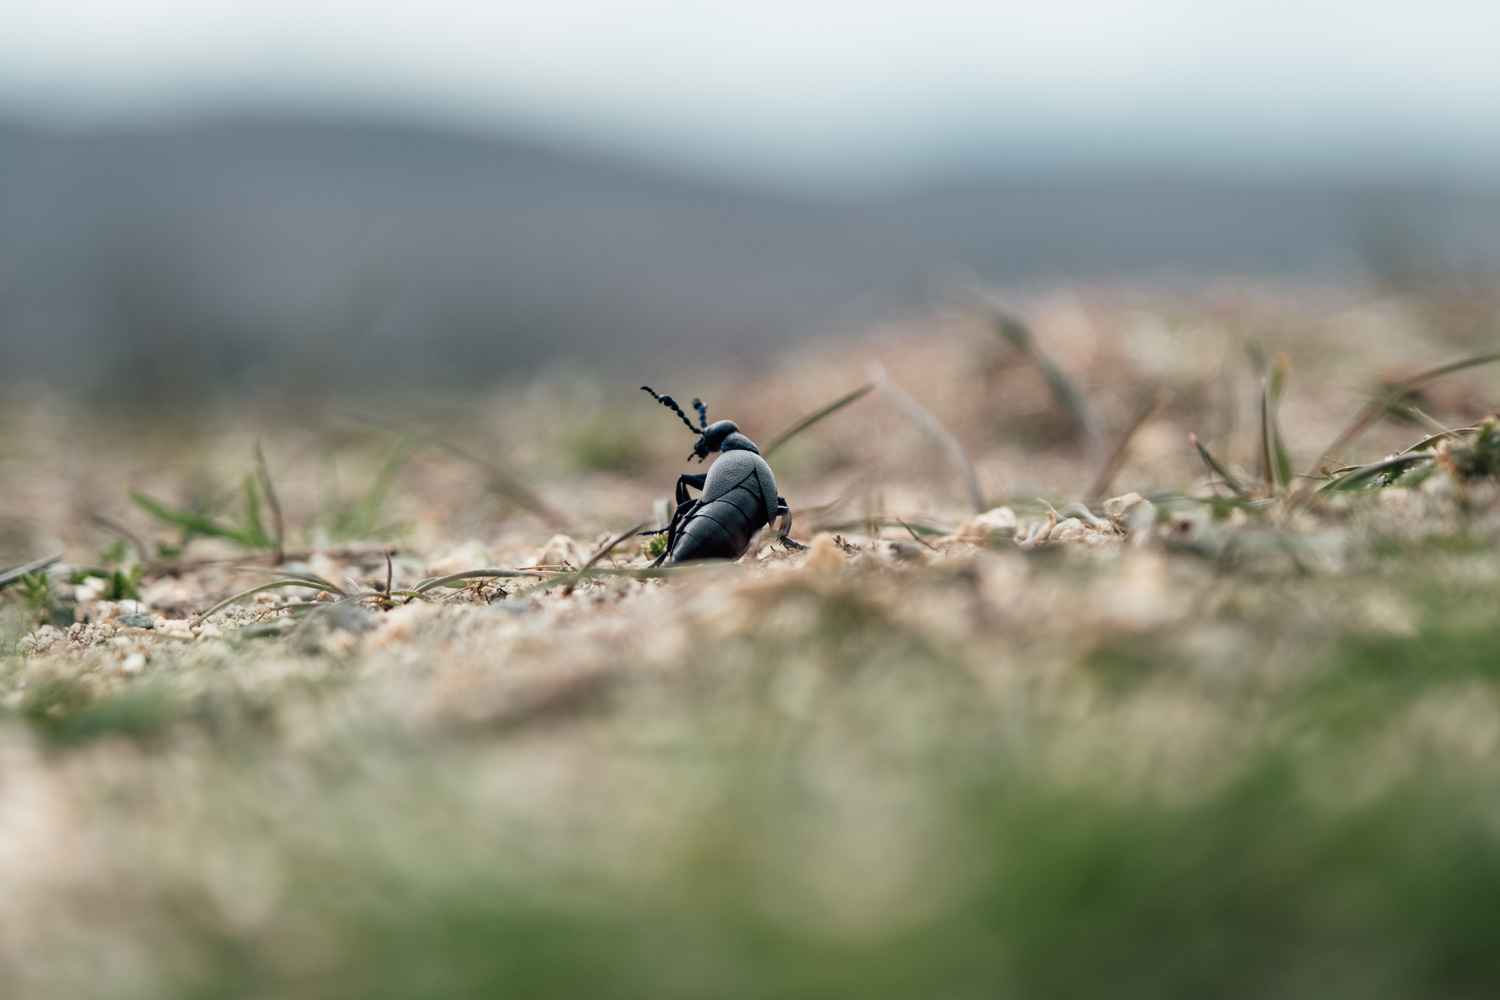 A beetle bug sitting on the ground. Blurry mountains are in the background.